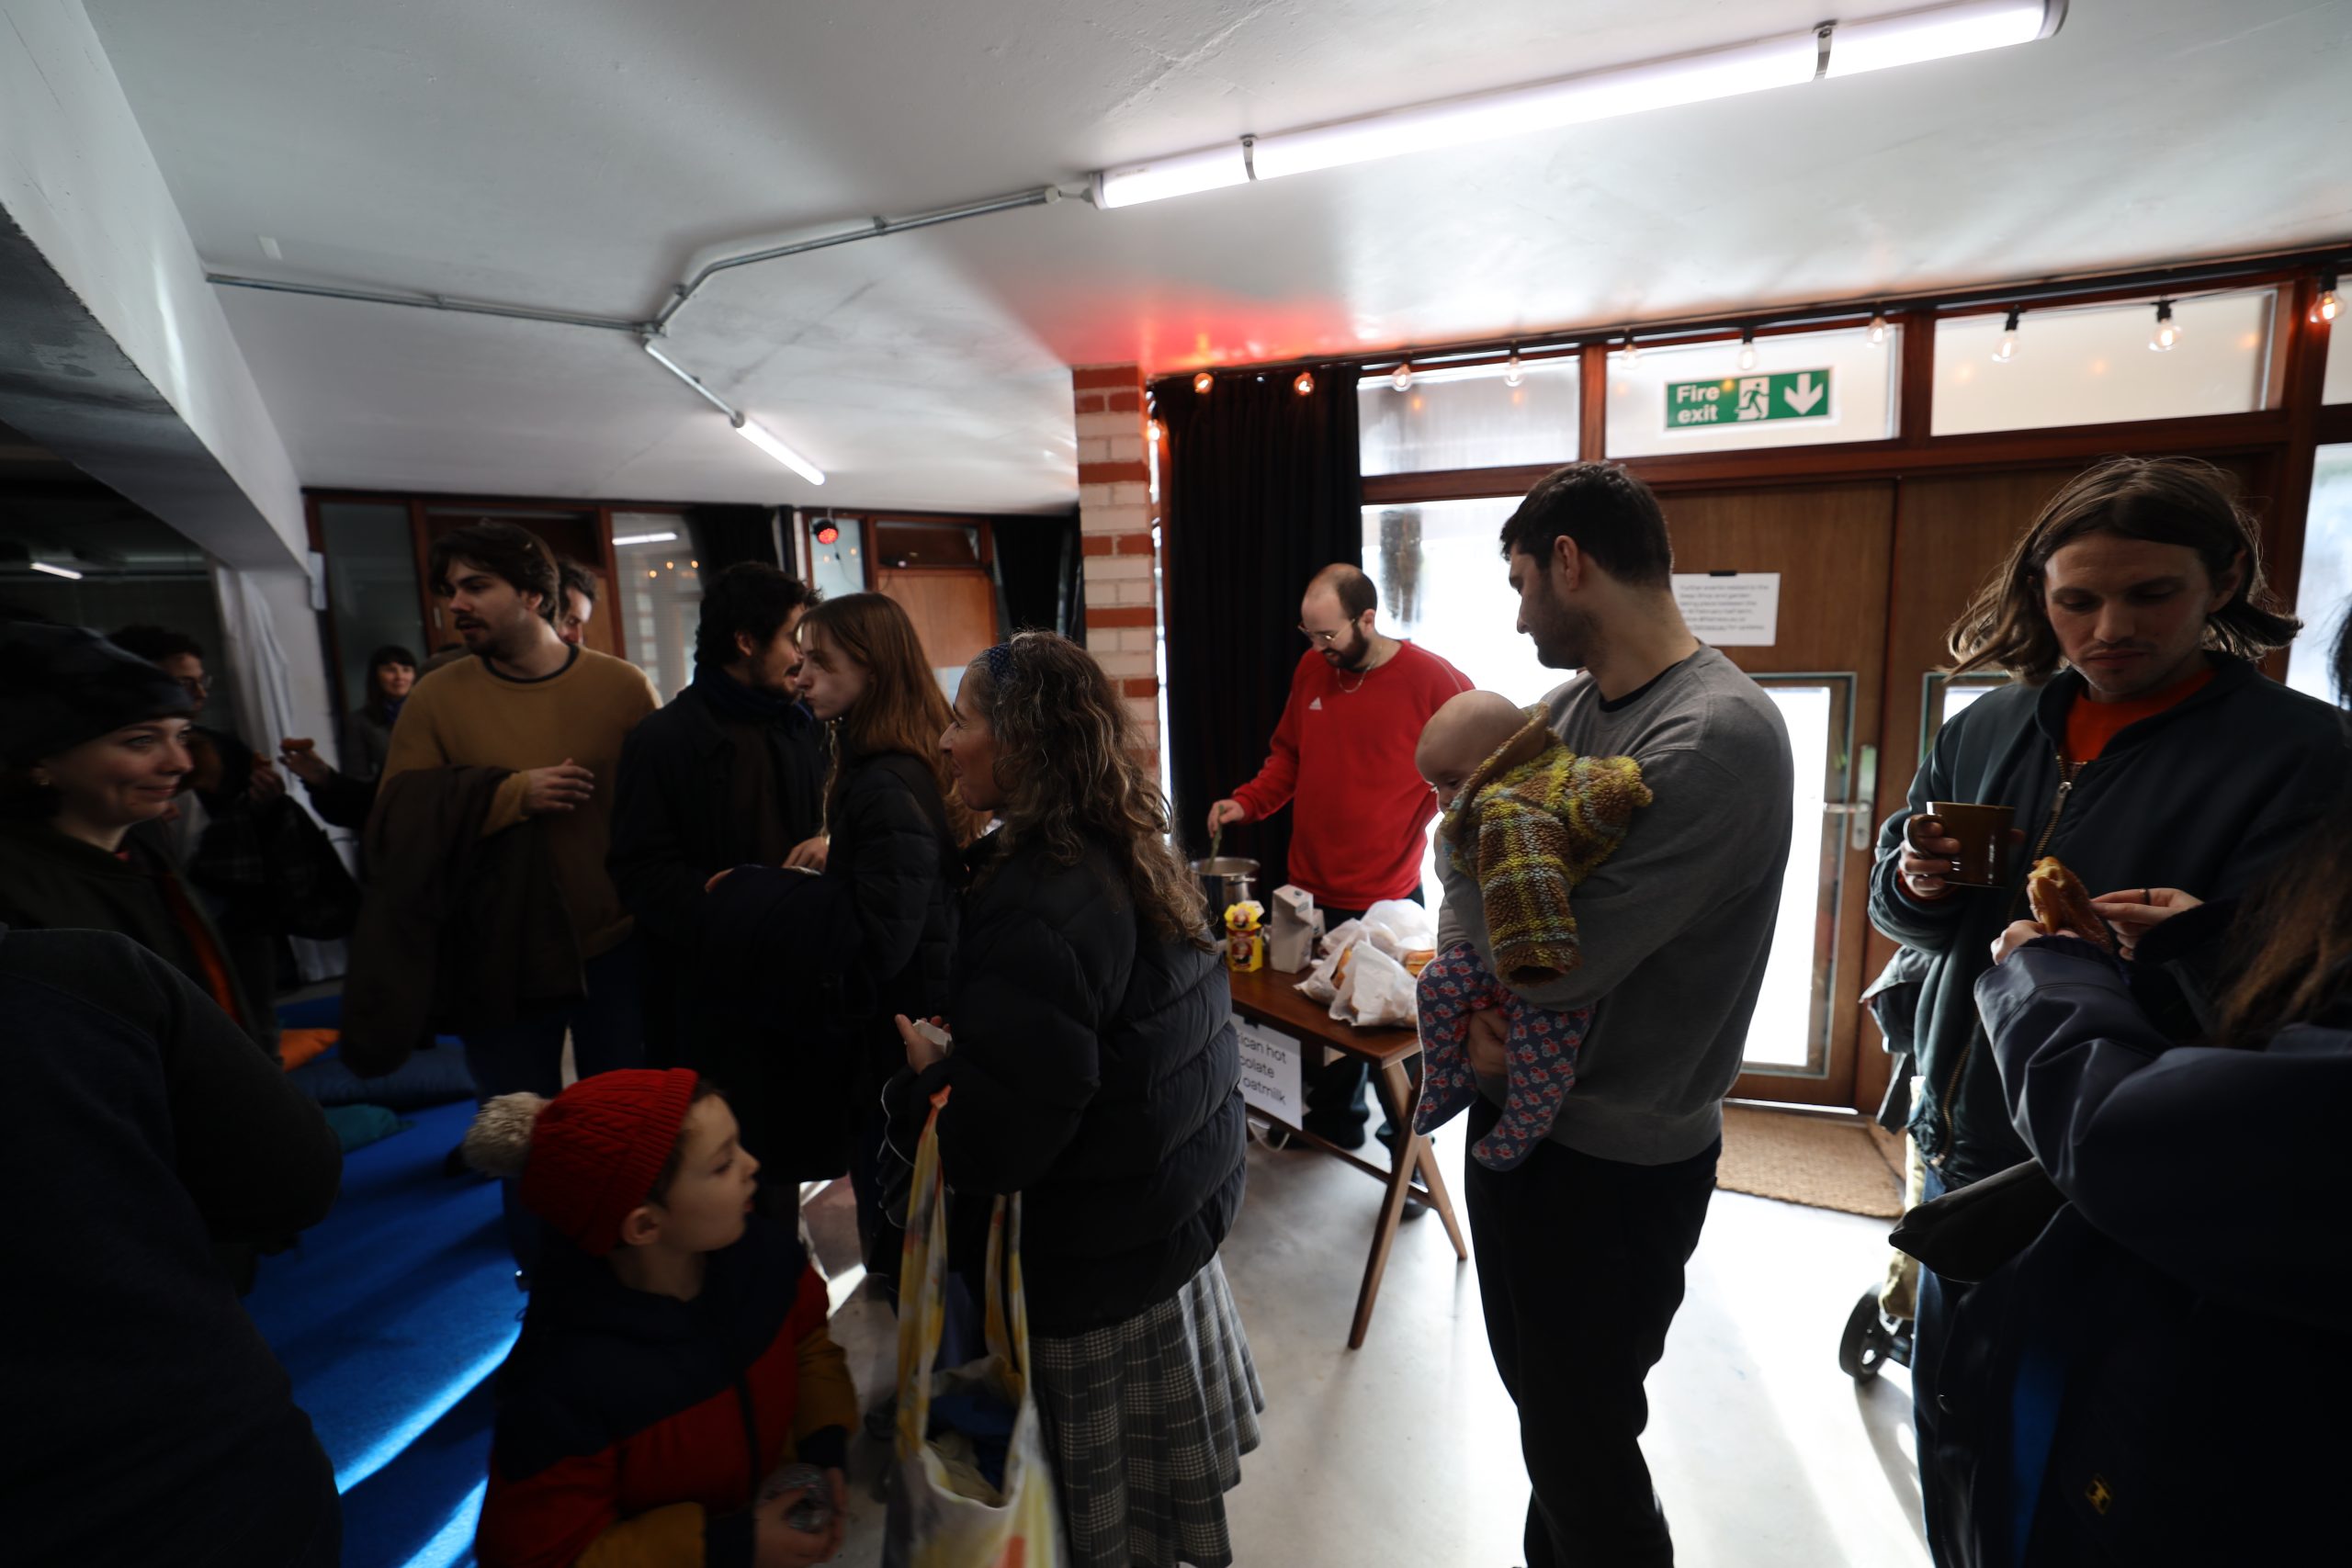 documentation of event showing visitors to the swap shop 